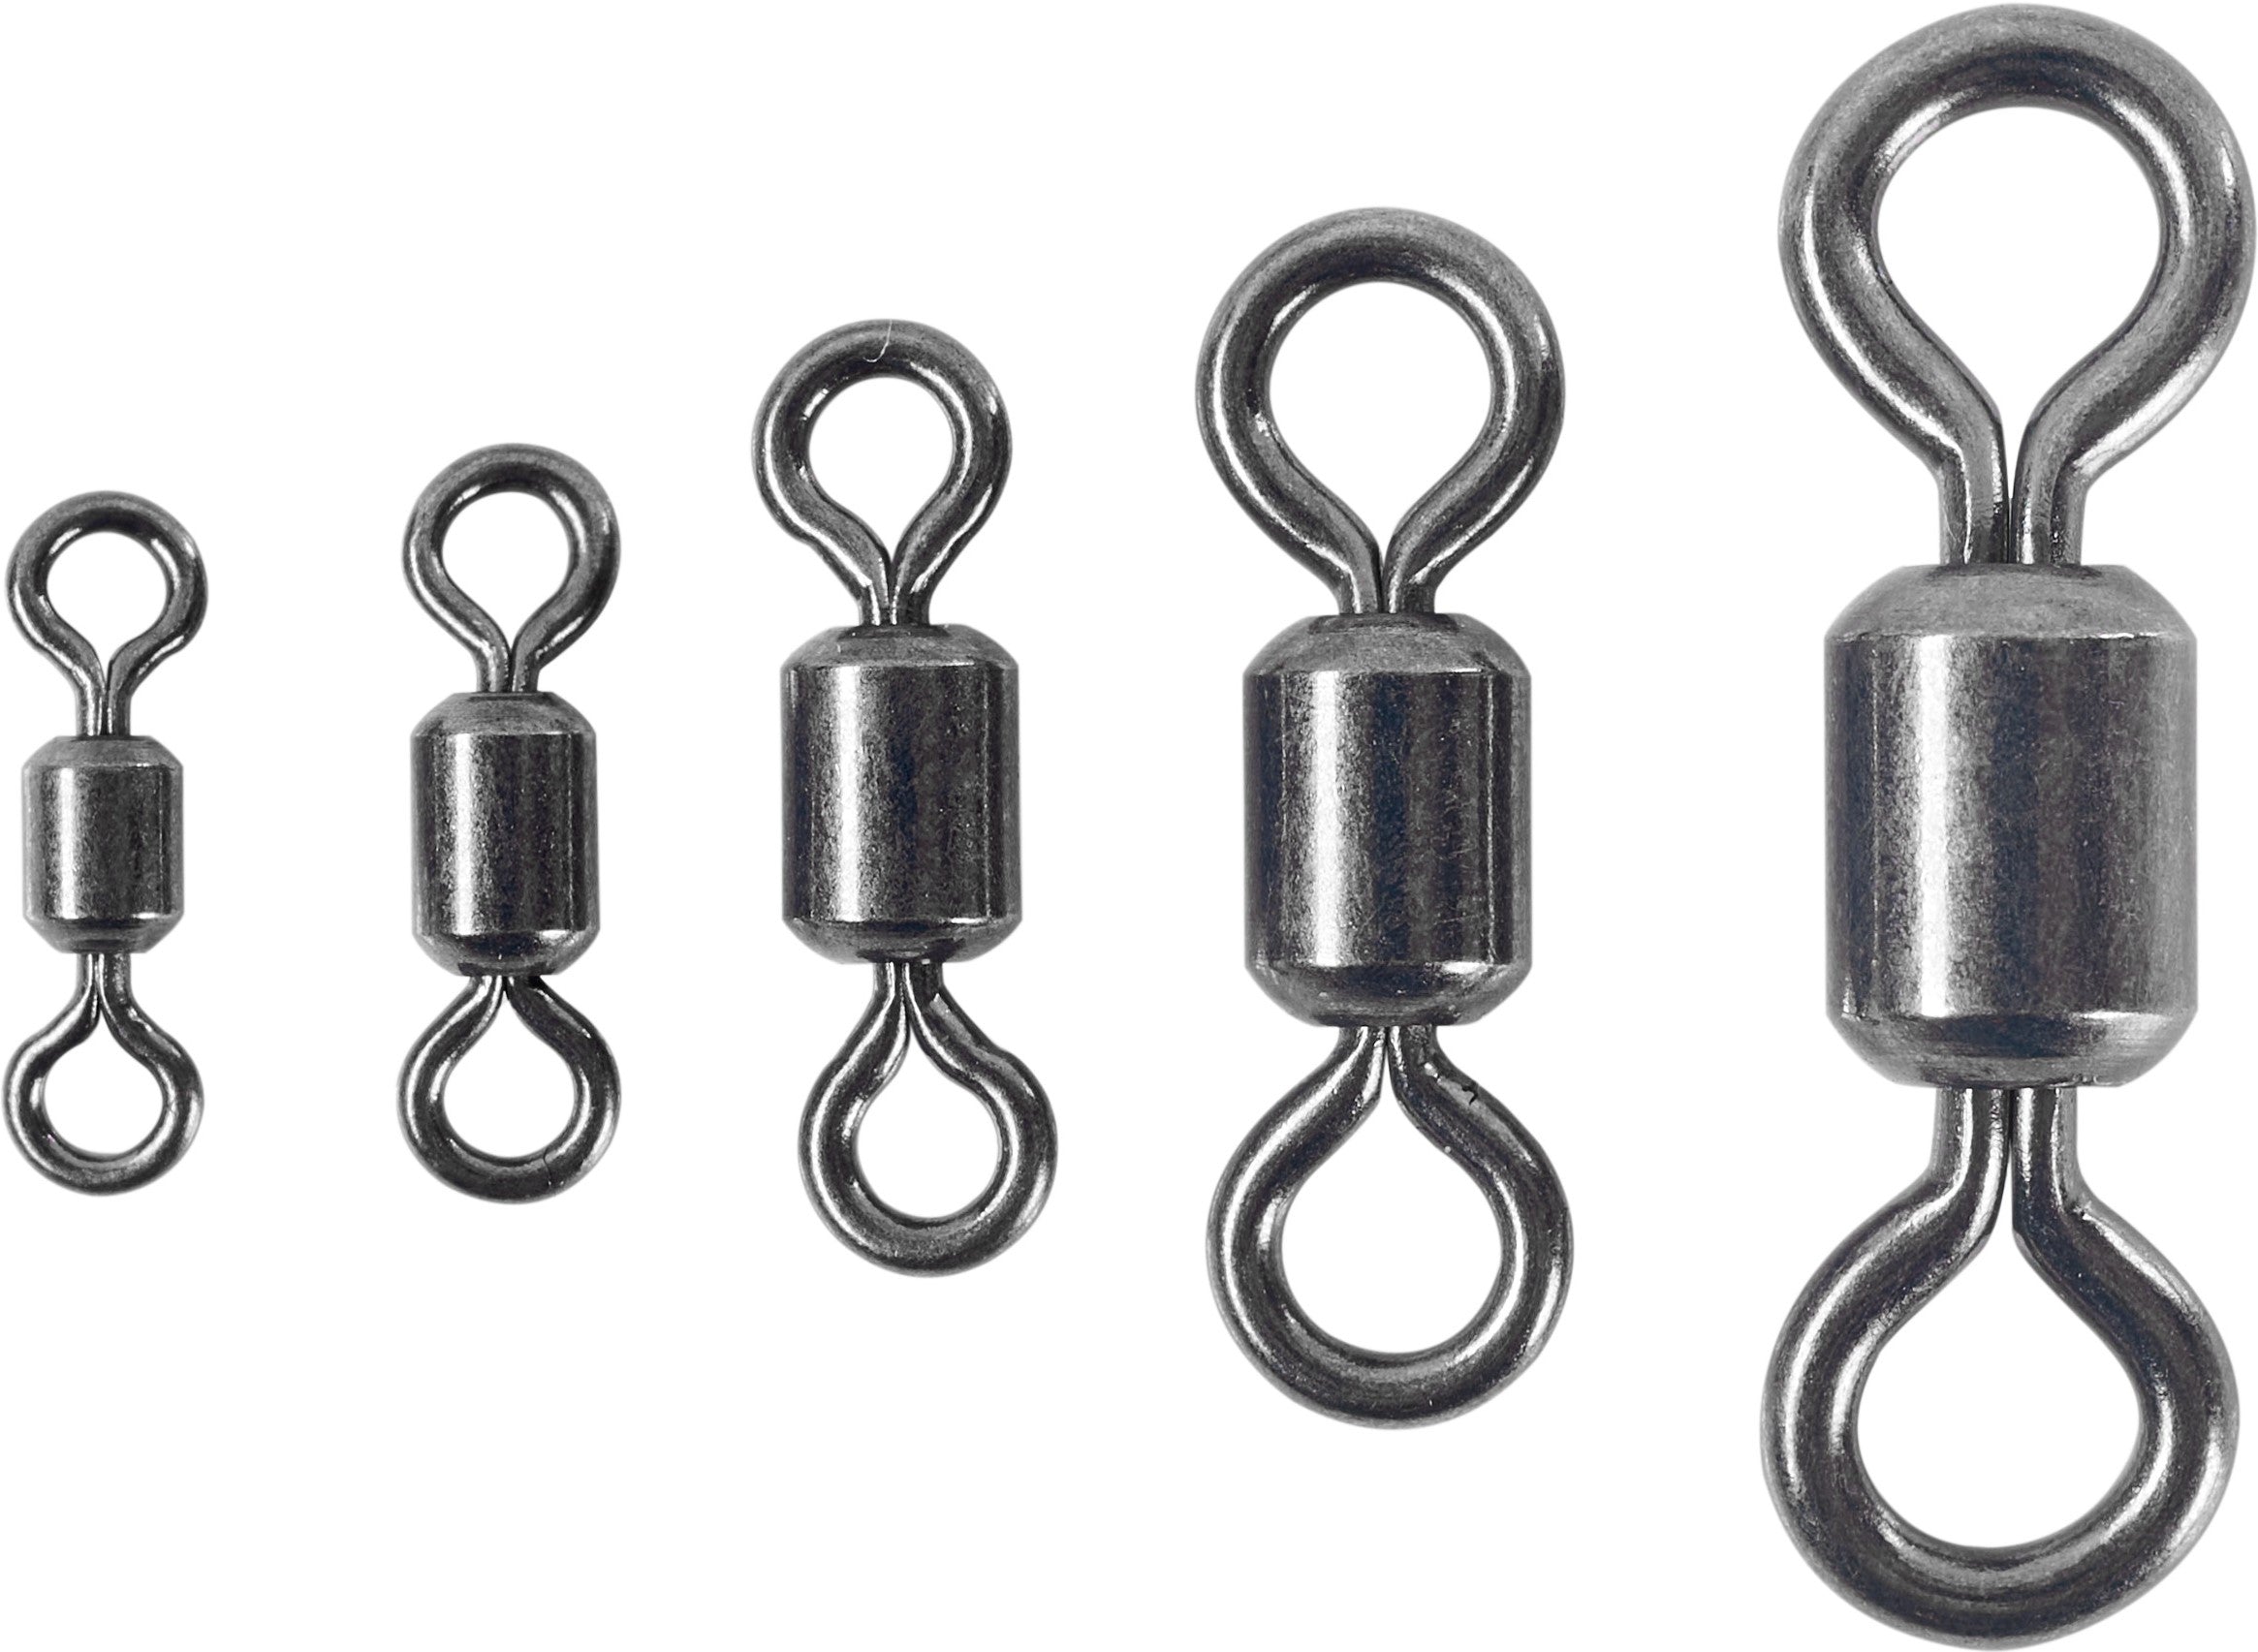 SPRO Power Swivel Dura Slick Finish - 10 Pack — Discount Tackle